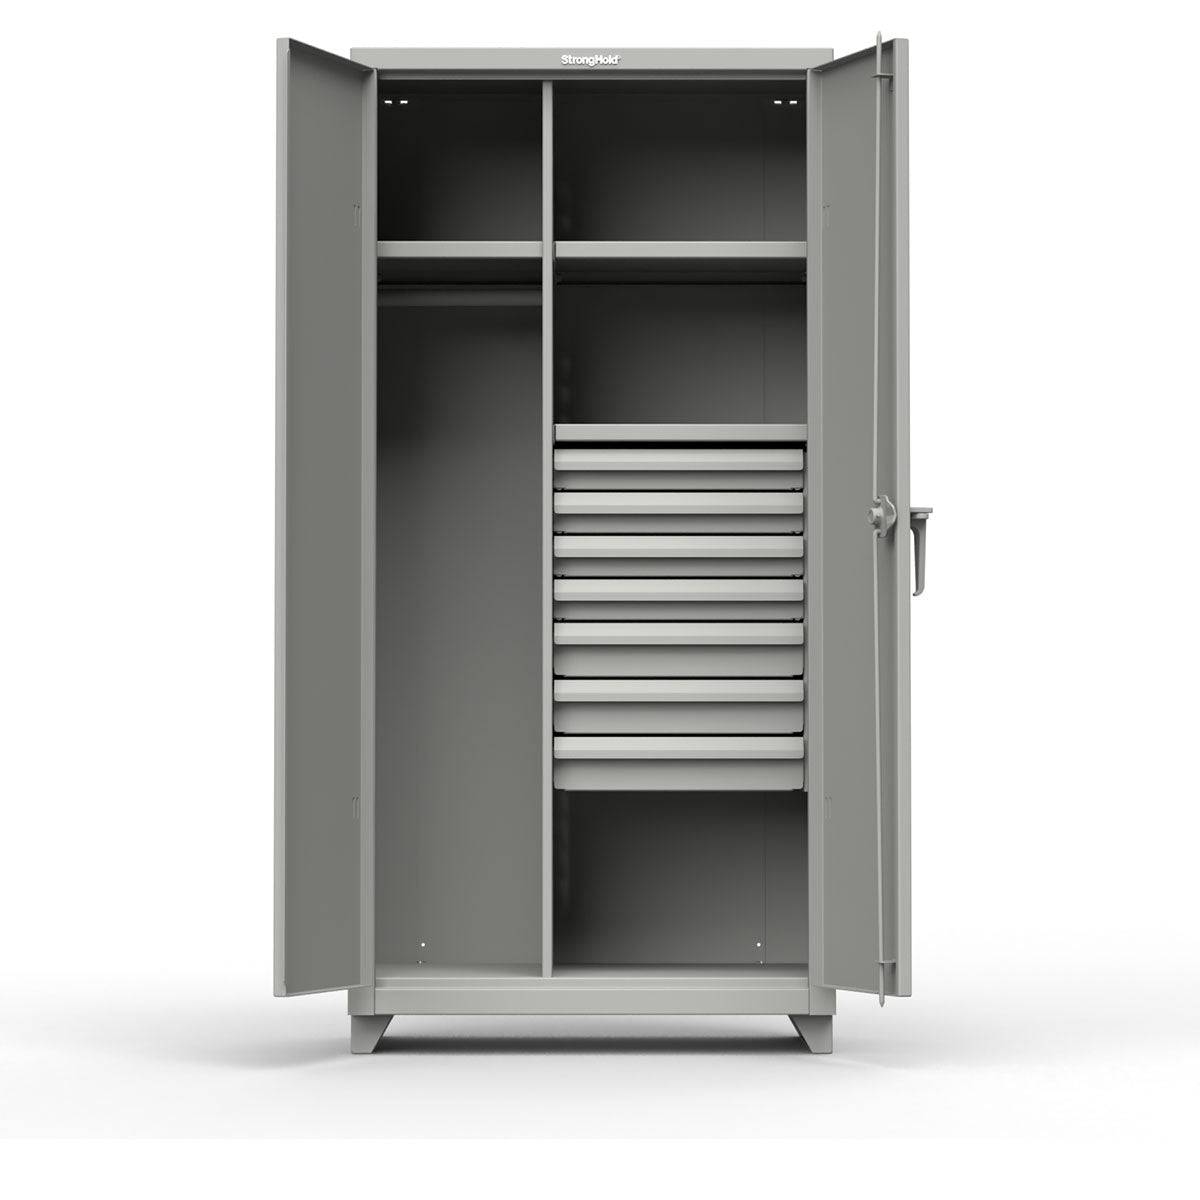 Extreme Duty 12 GA Uniform Cabinet with 7 Drawers, 3 Shelves - 36 In. W x 24 In. D x 78 In. H - Strong Hold